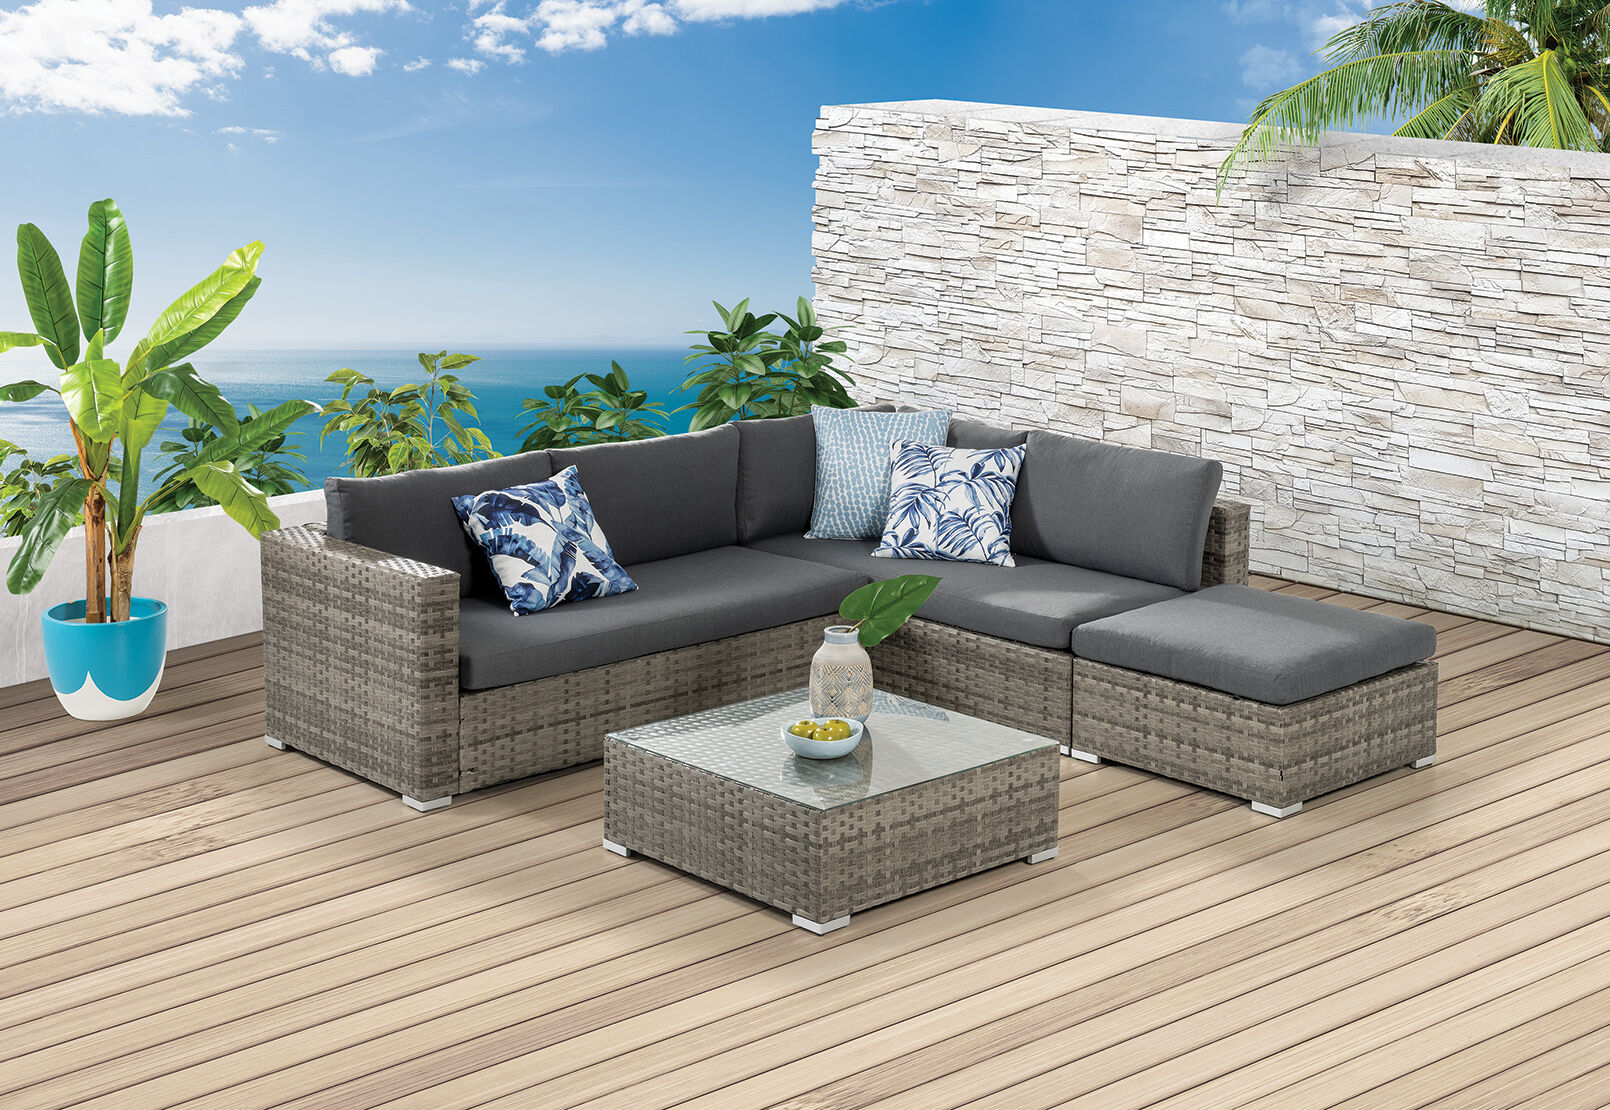 Space Saving Ideas For Small Outdoor Spaces - Amart Tips